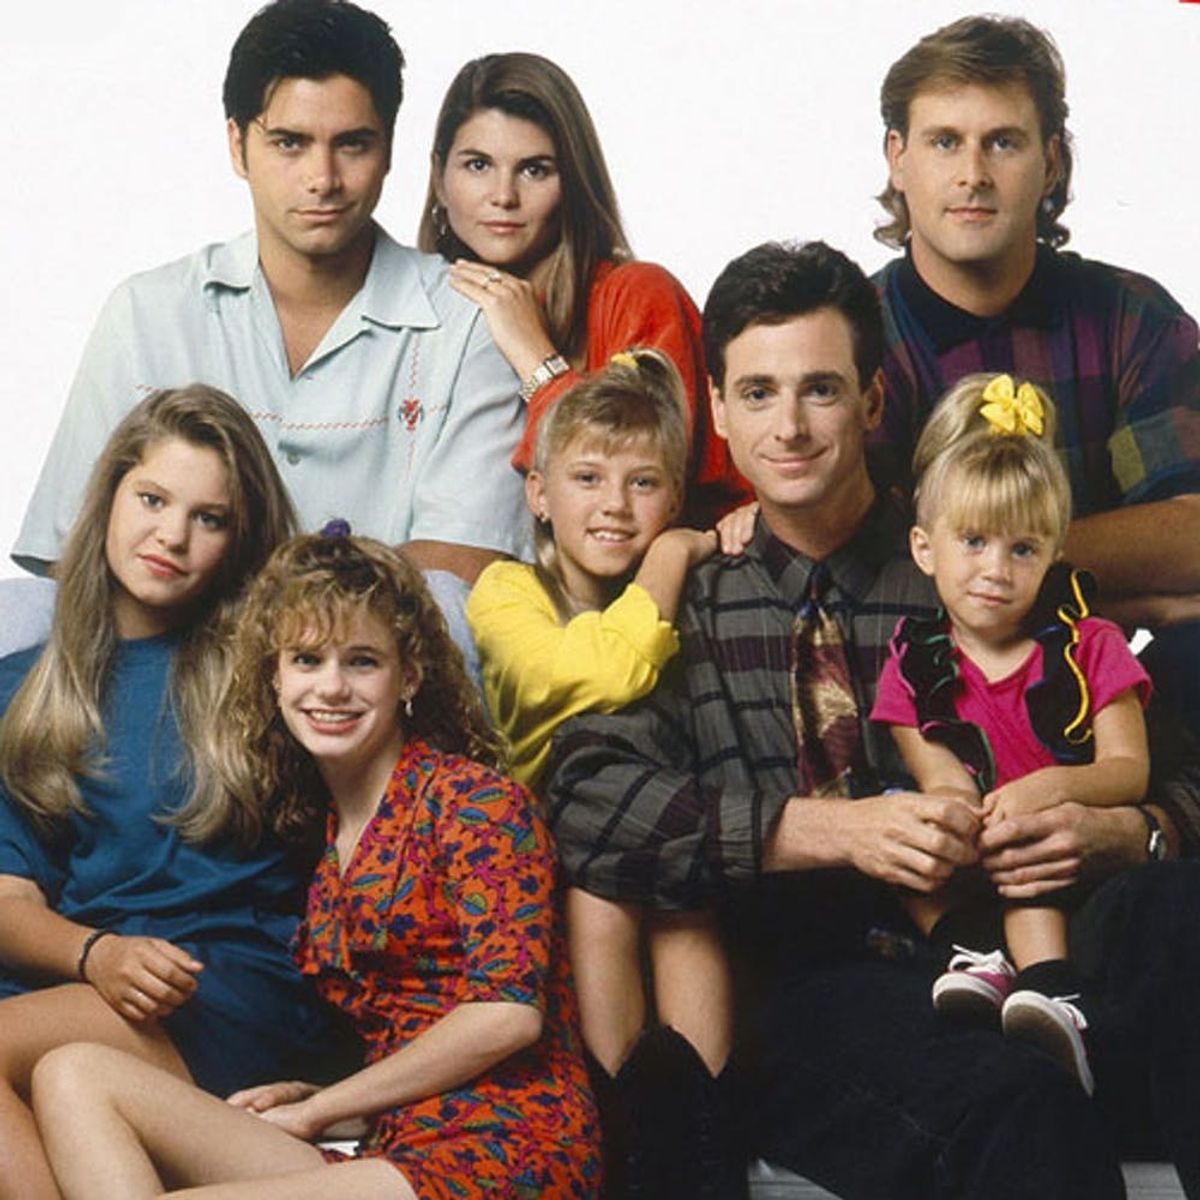 The First Teaser for Fuller House Will Make You Feel ALL the Feels